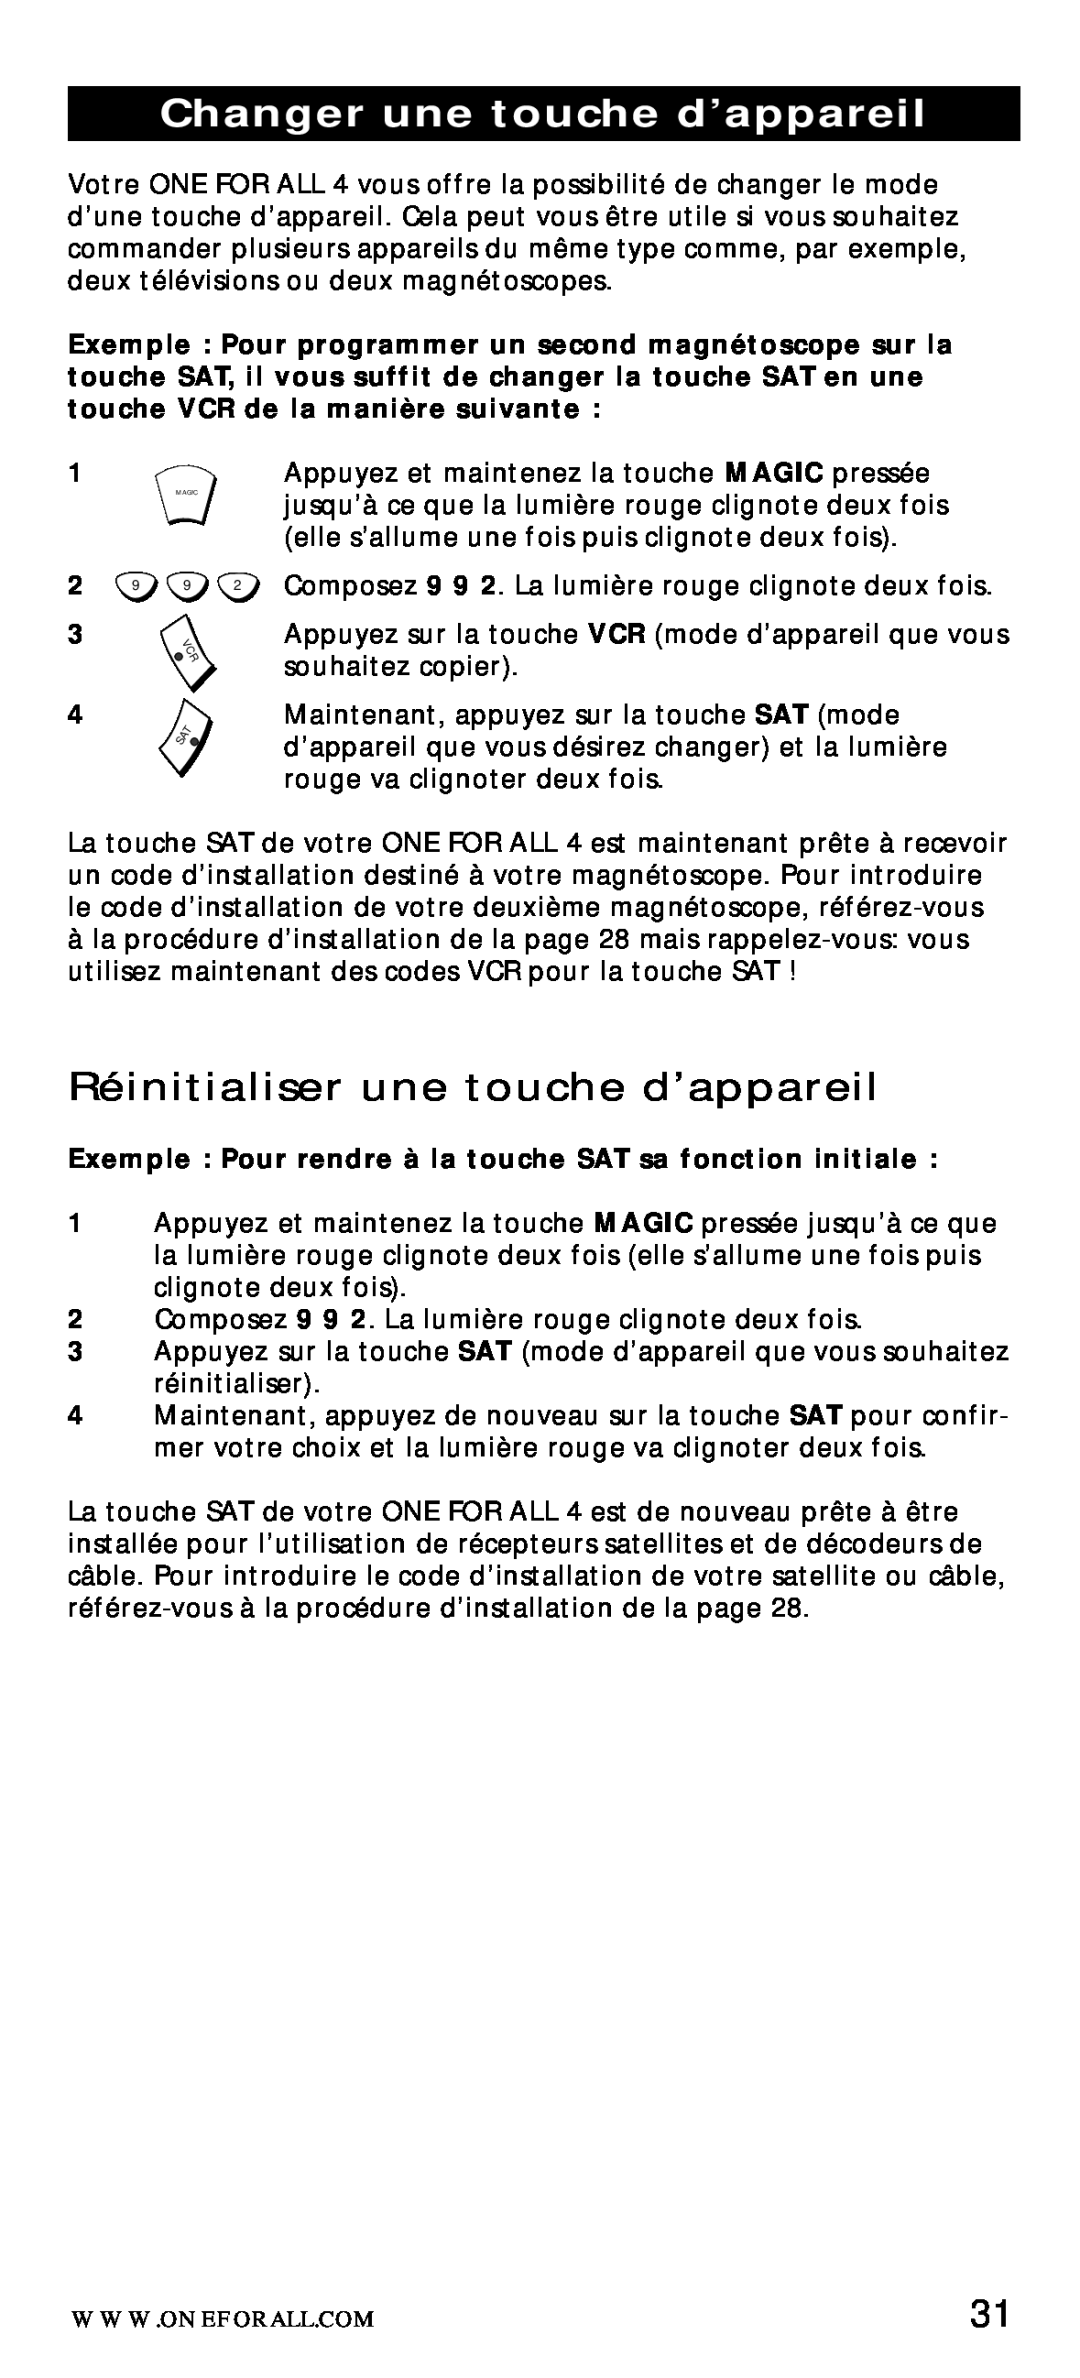 One for All URC-7040 manual Changer une touche d’appareil, Réinitialiser une touche d’appareil 